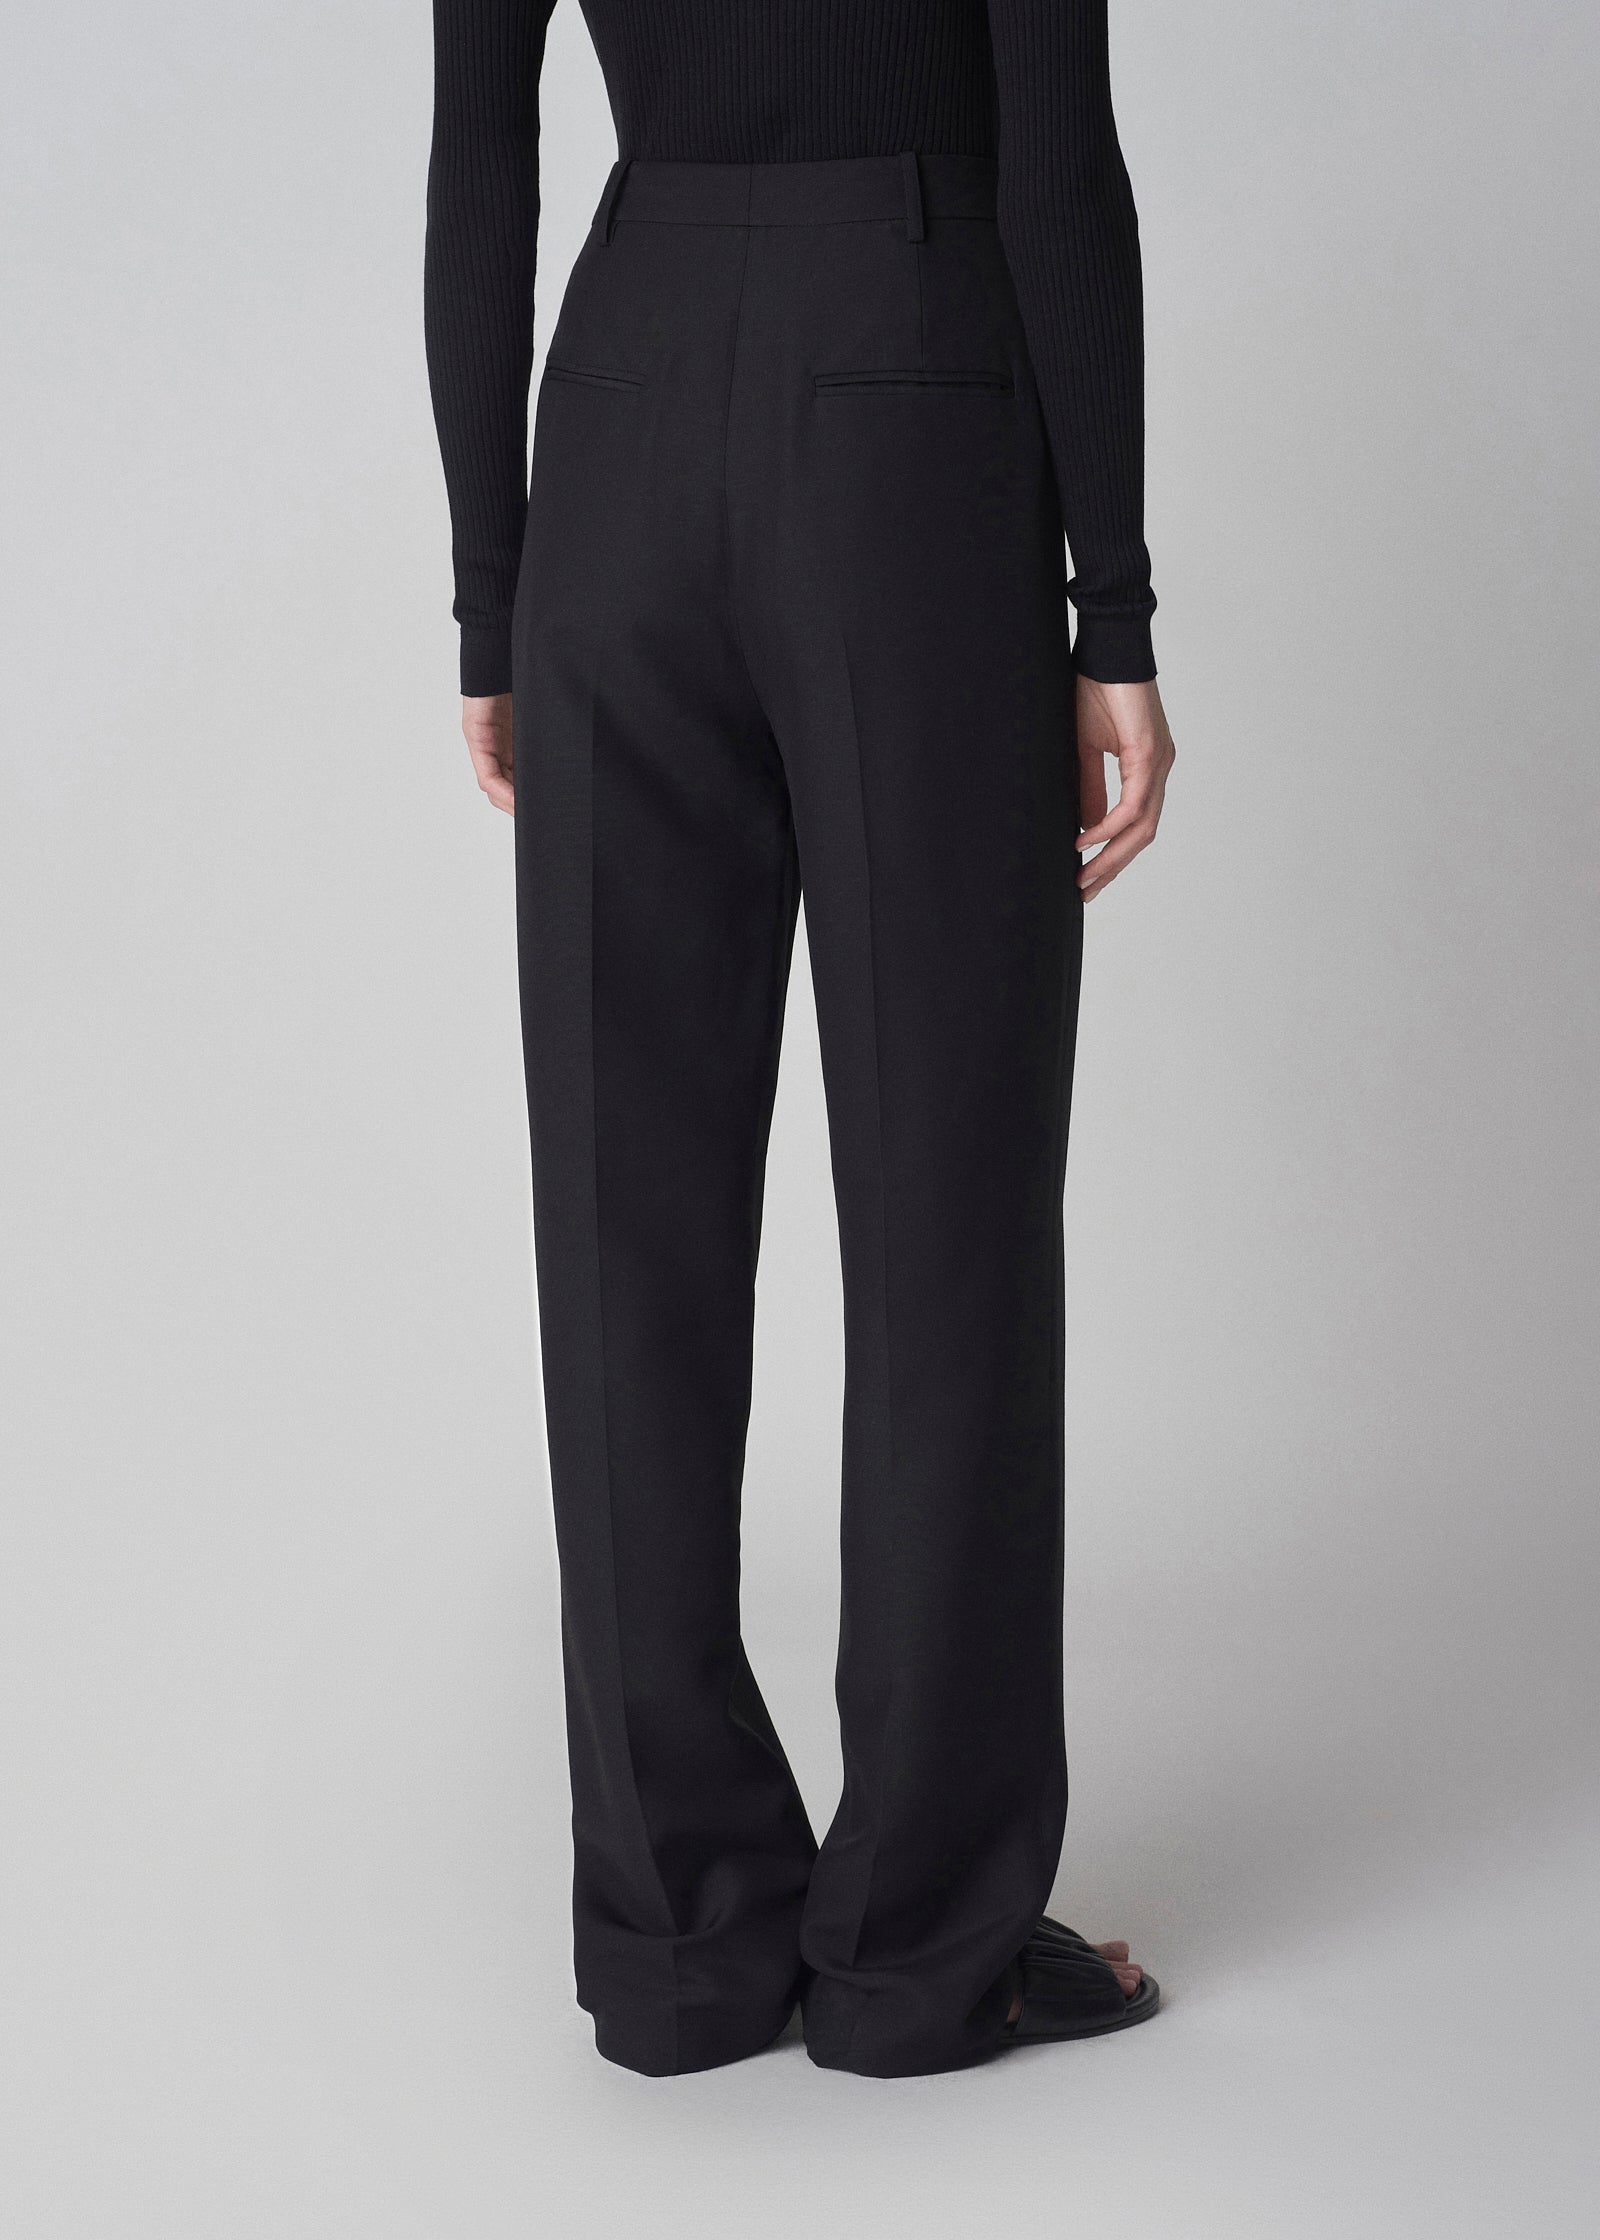 Flat Front Evening Trouser in Faille - Black - CO Collections